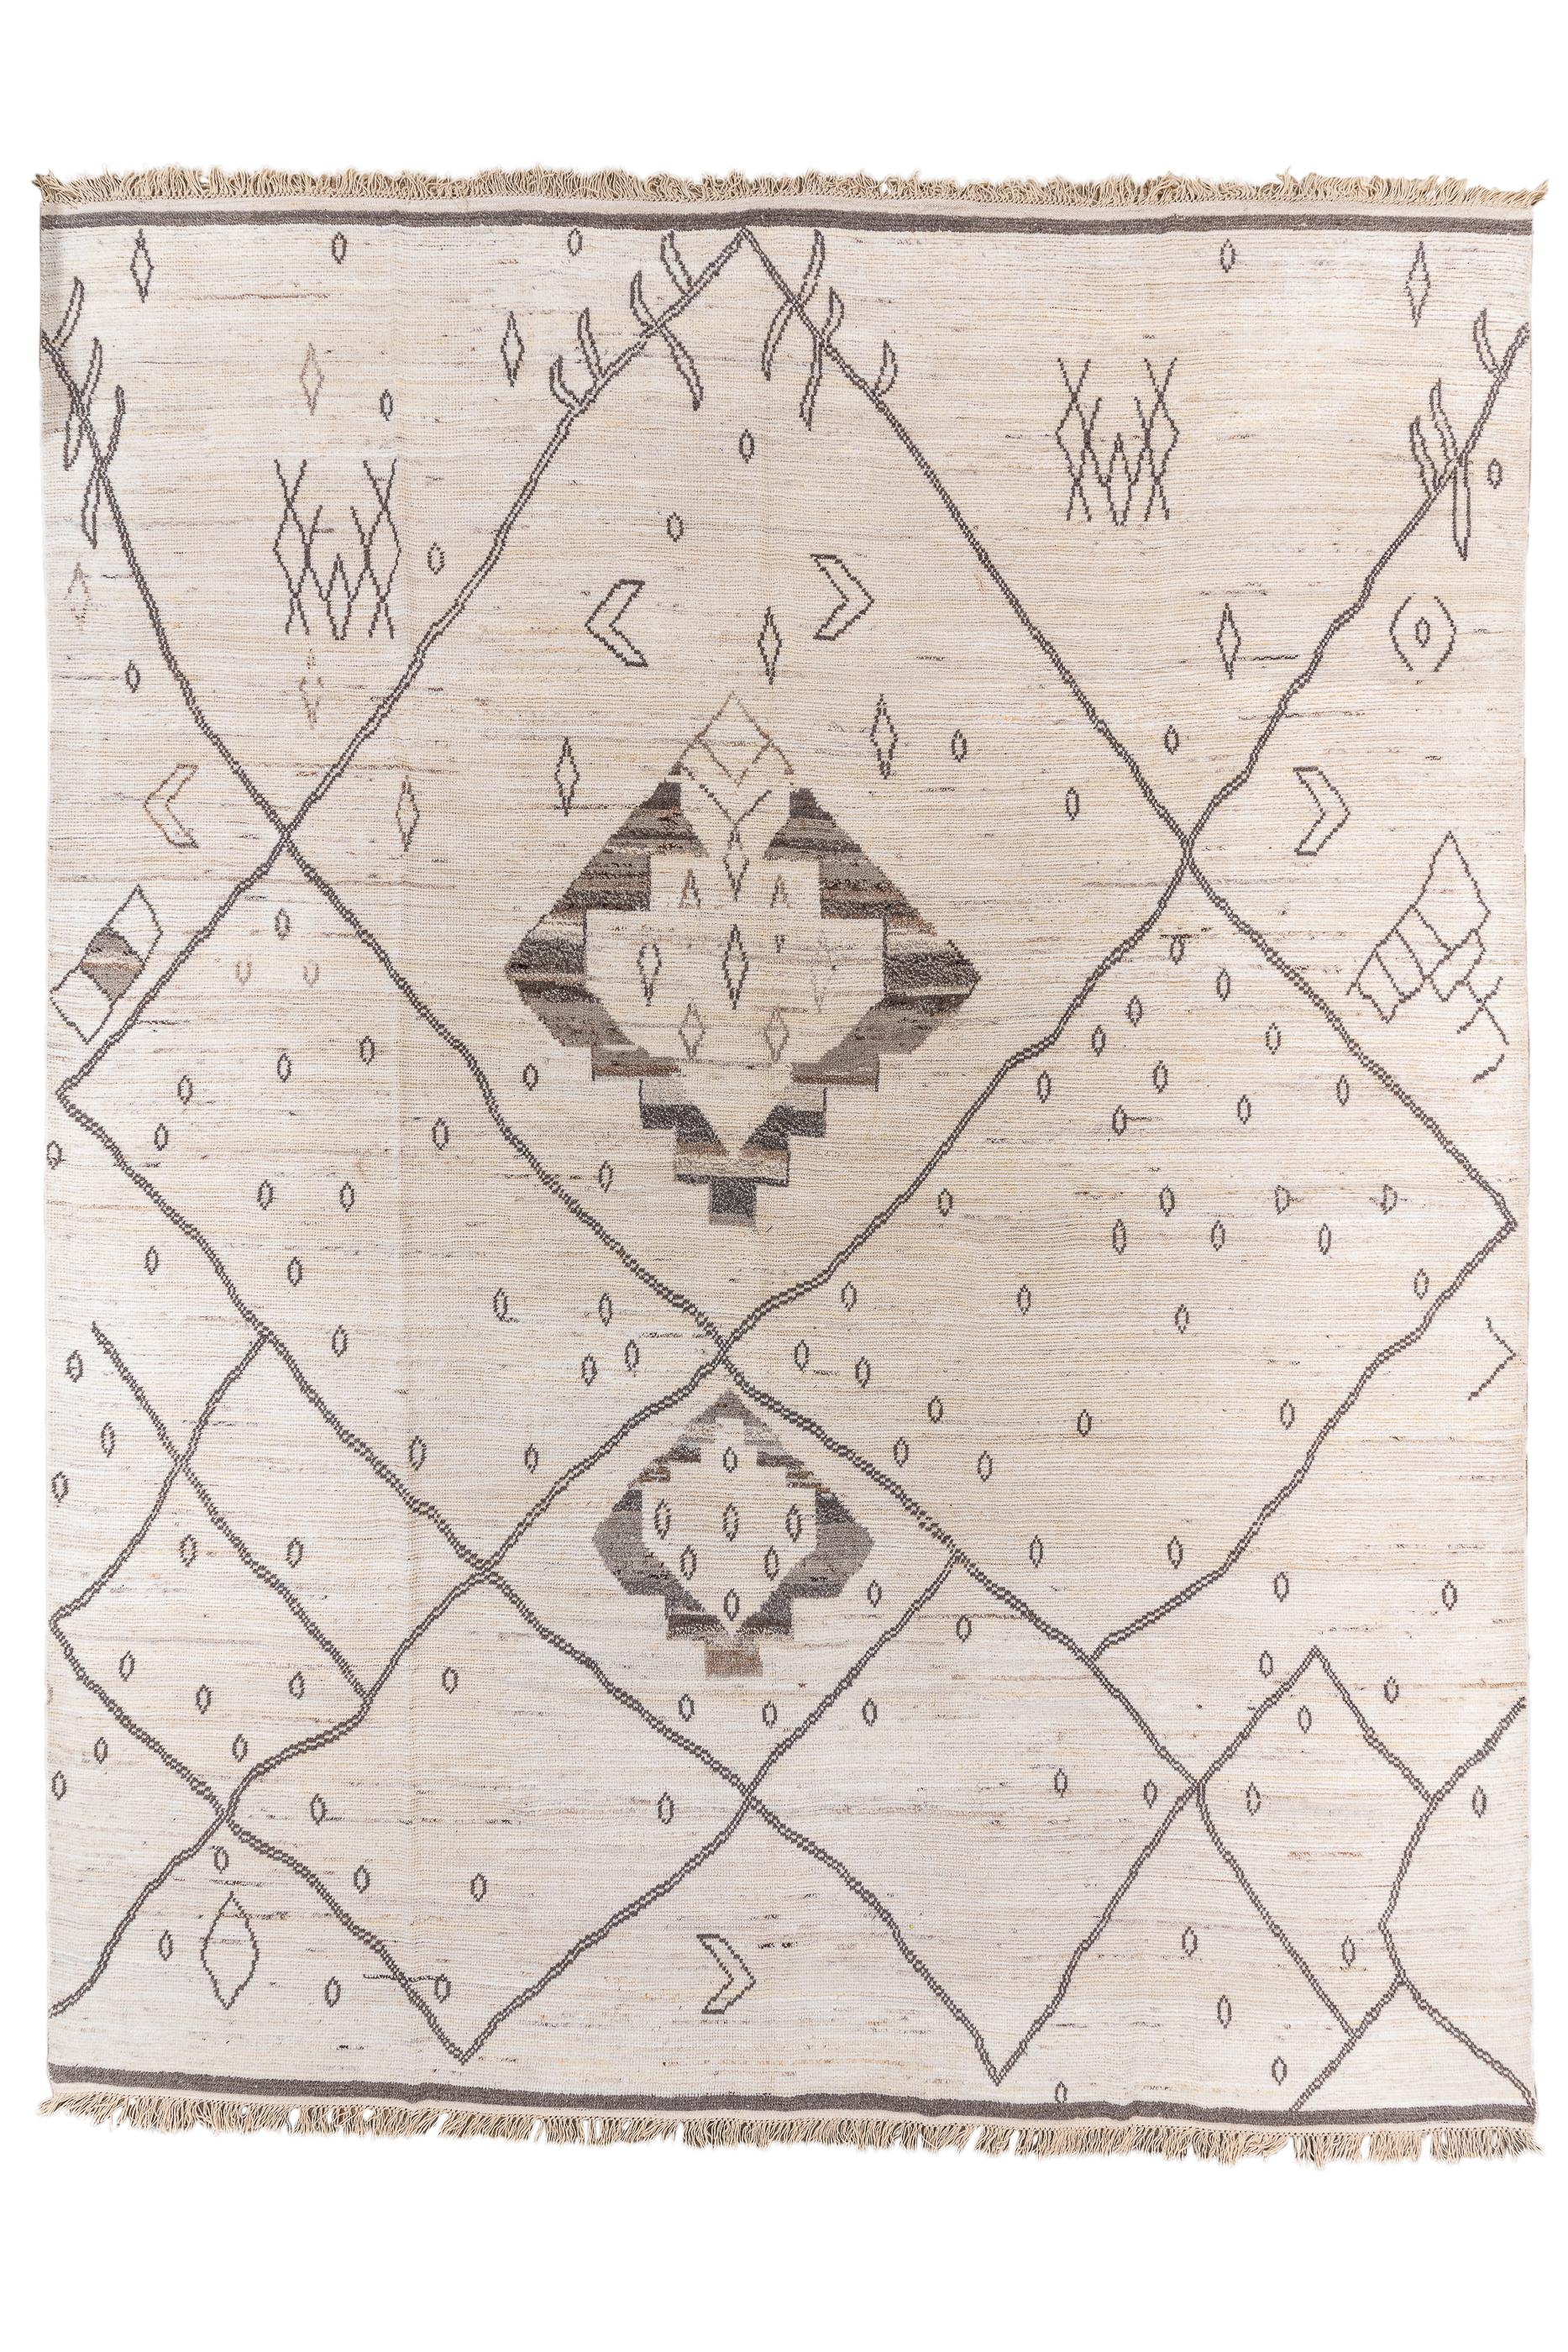 Looks and feels sort of like a contempo Moroccan, but actually it is an Indian village production, with a coarse weave supporting a simple, yet effective giant lozenge lattice design on a natural ecru field. Narrow plain darkest brown border. Coarse